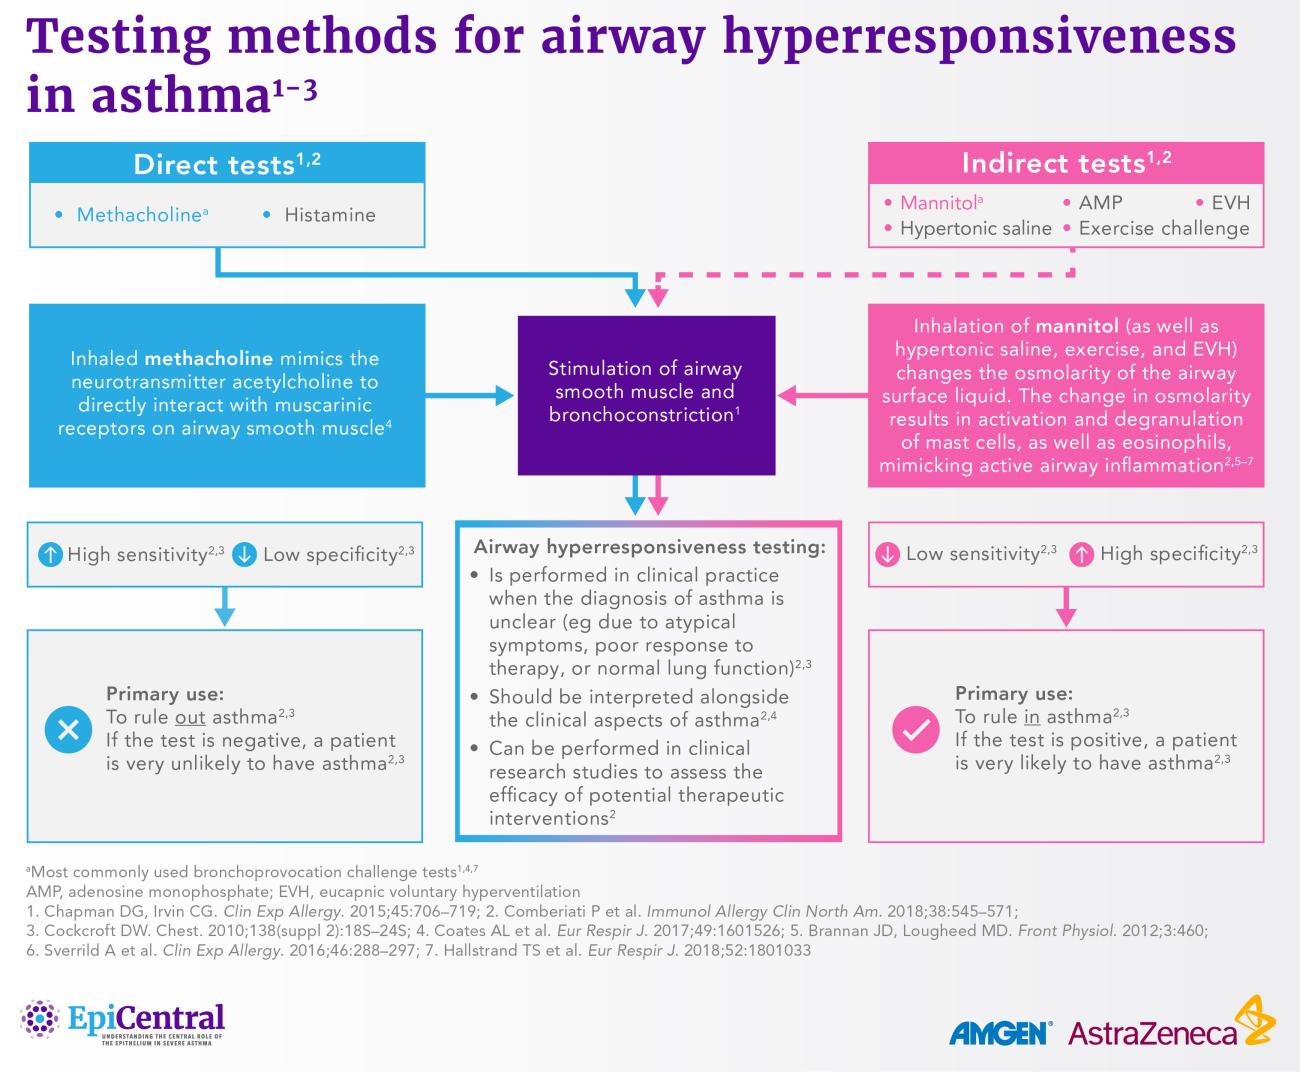 Summary of the testing methods used for airway hyperresponsiveness in asthma